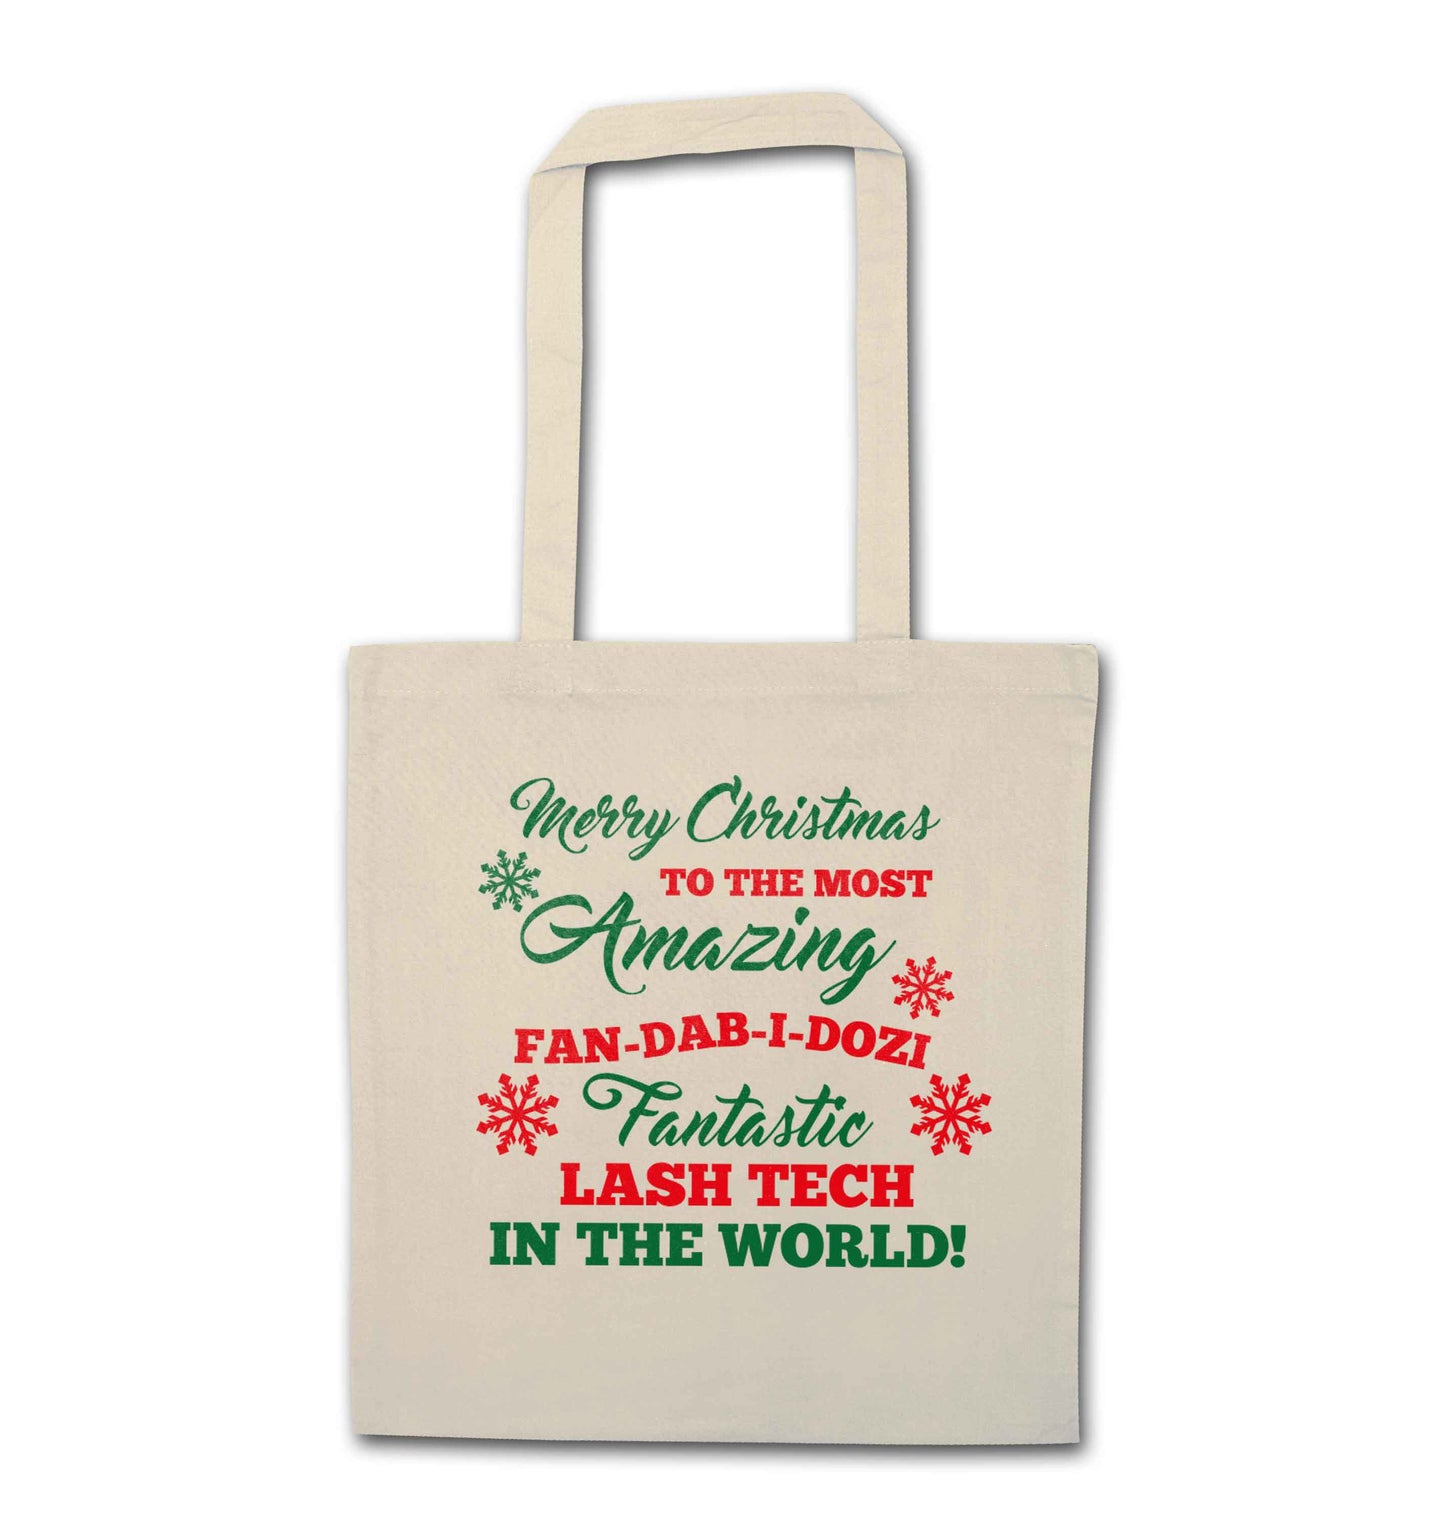 Merry Christmas to the most amazing fan-dab-i-dozi fantasic lash tech in the world natural tote bag